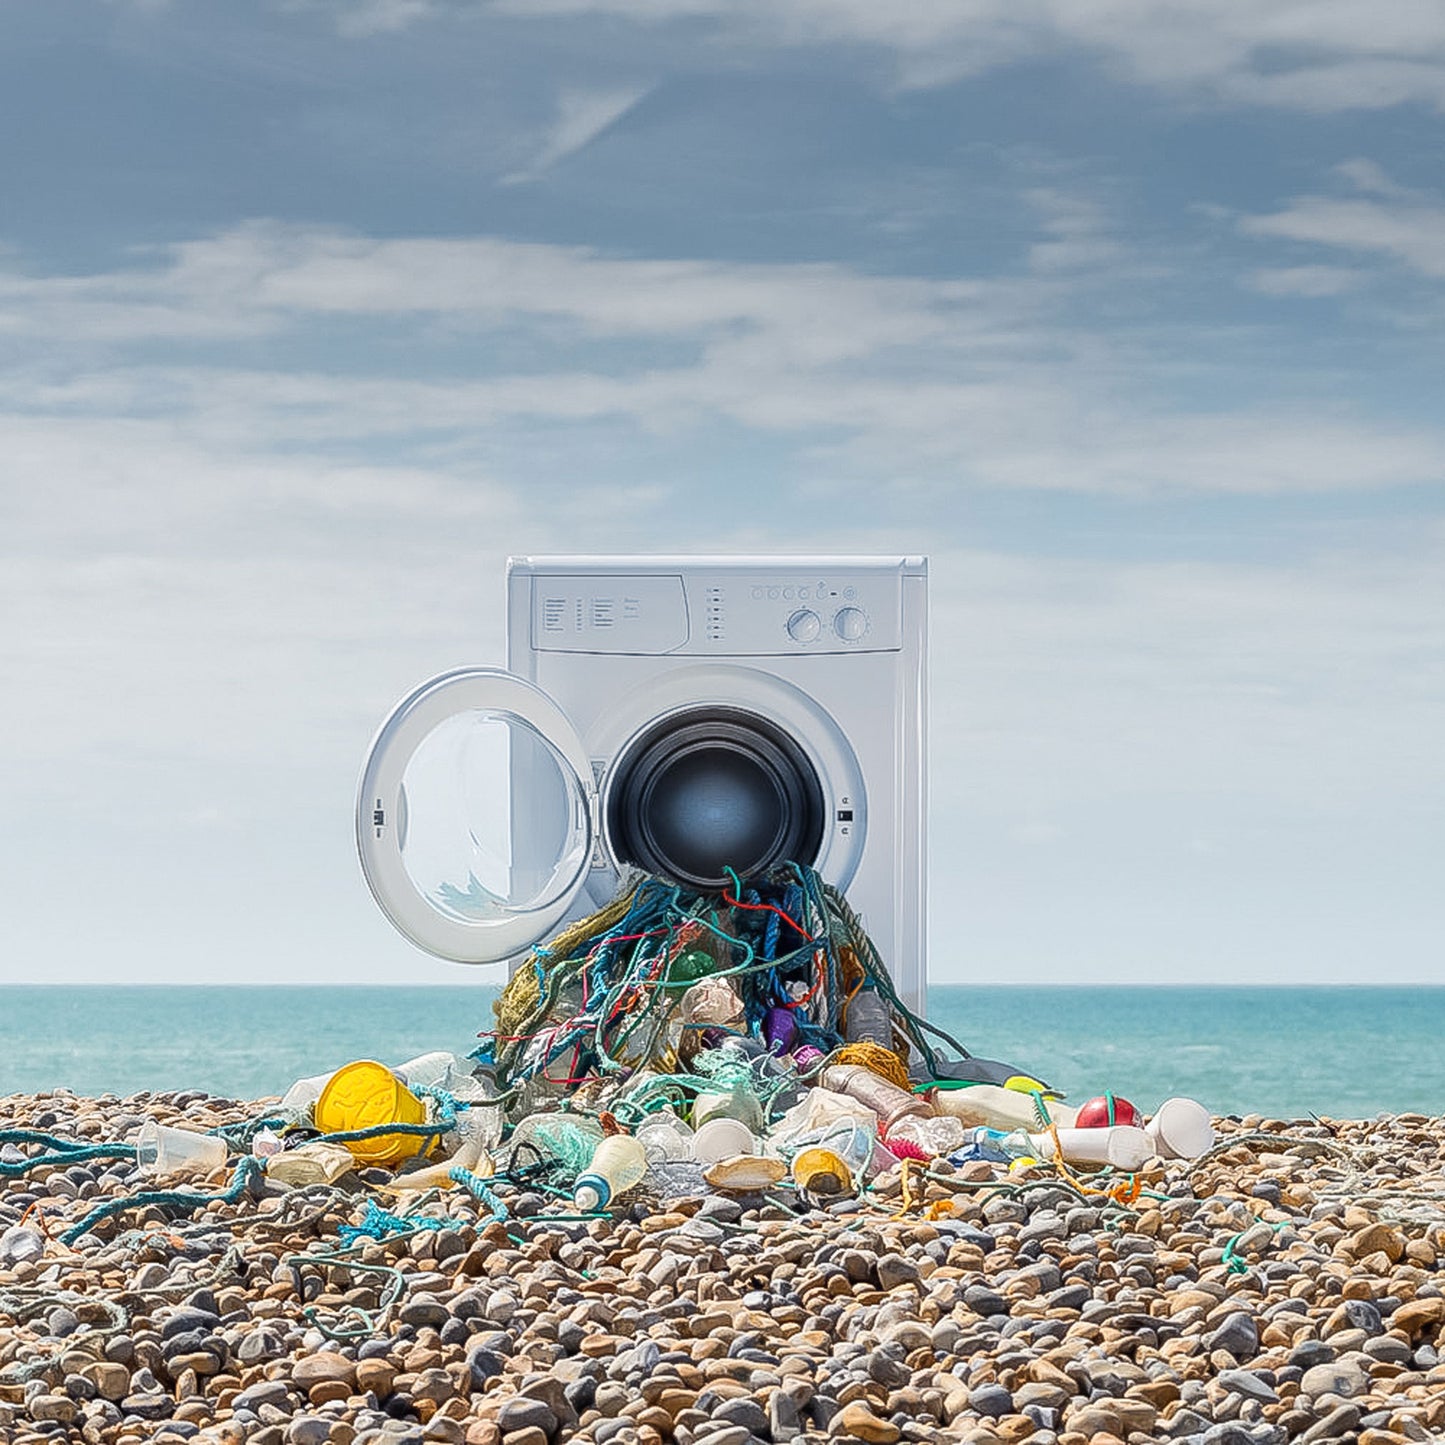 A washing machine on a pebble beach with plastic bottles and nets spilling out of the drum—an artistic interpretation of plastic pollution in our oceans